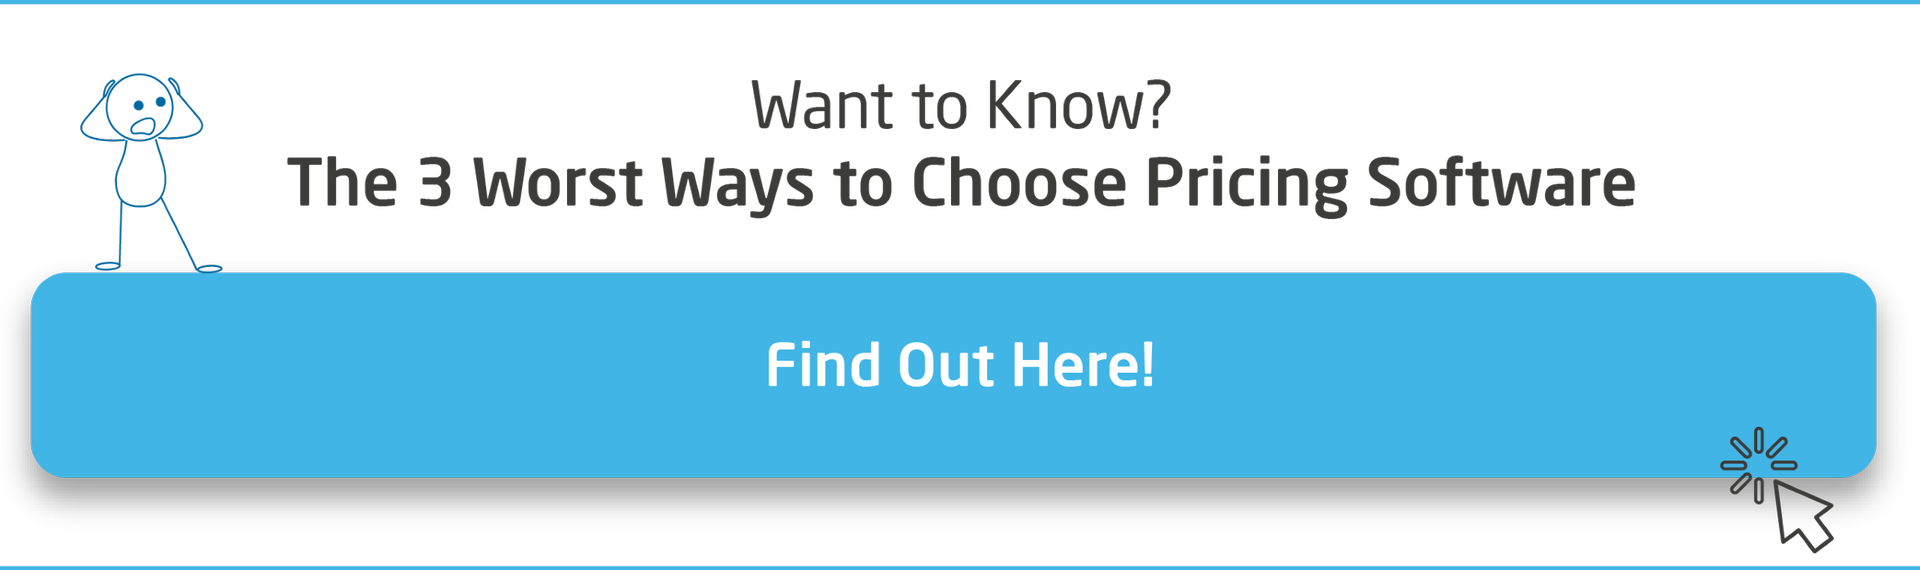 CTA-The-3-Worst-Ways-to-Choose-Pricing-Software